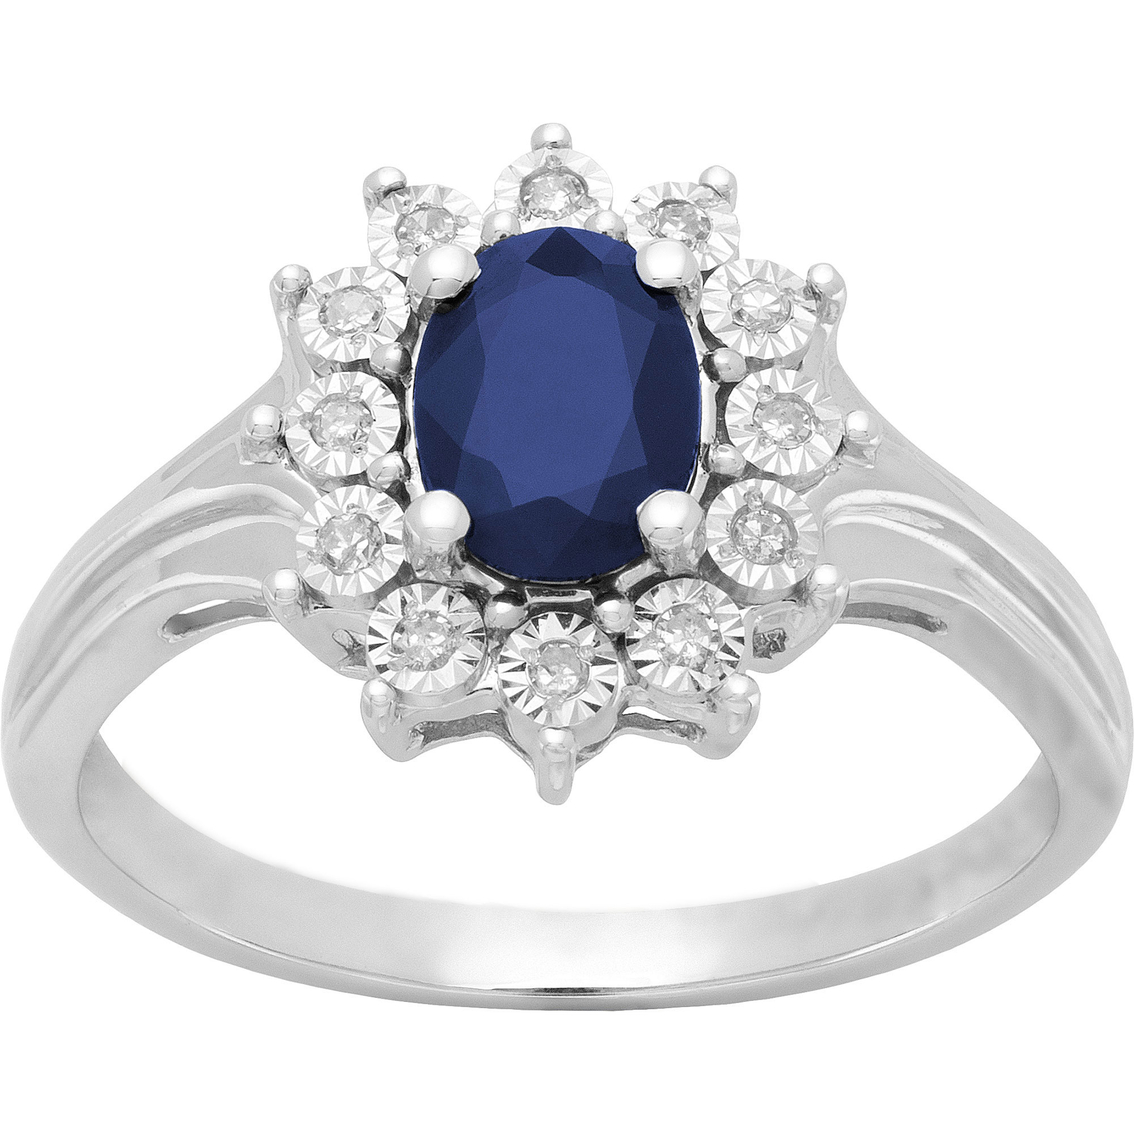 10k White Gold Blue Sapphire Ring With Diamond Accents | Gemstone Rings ...